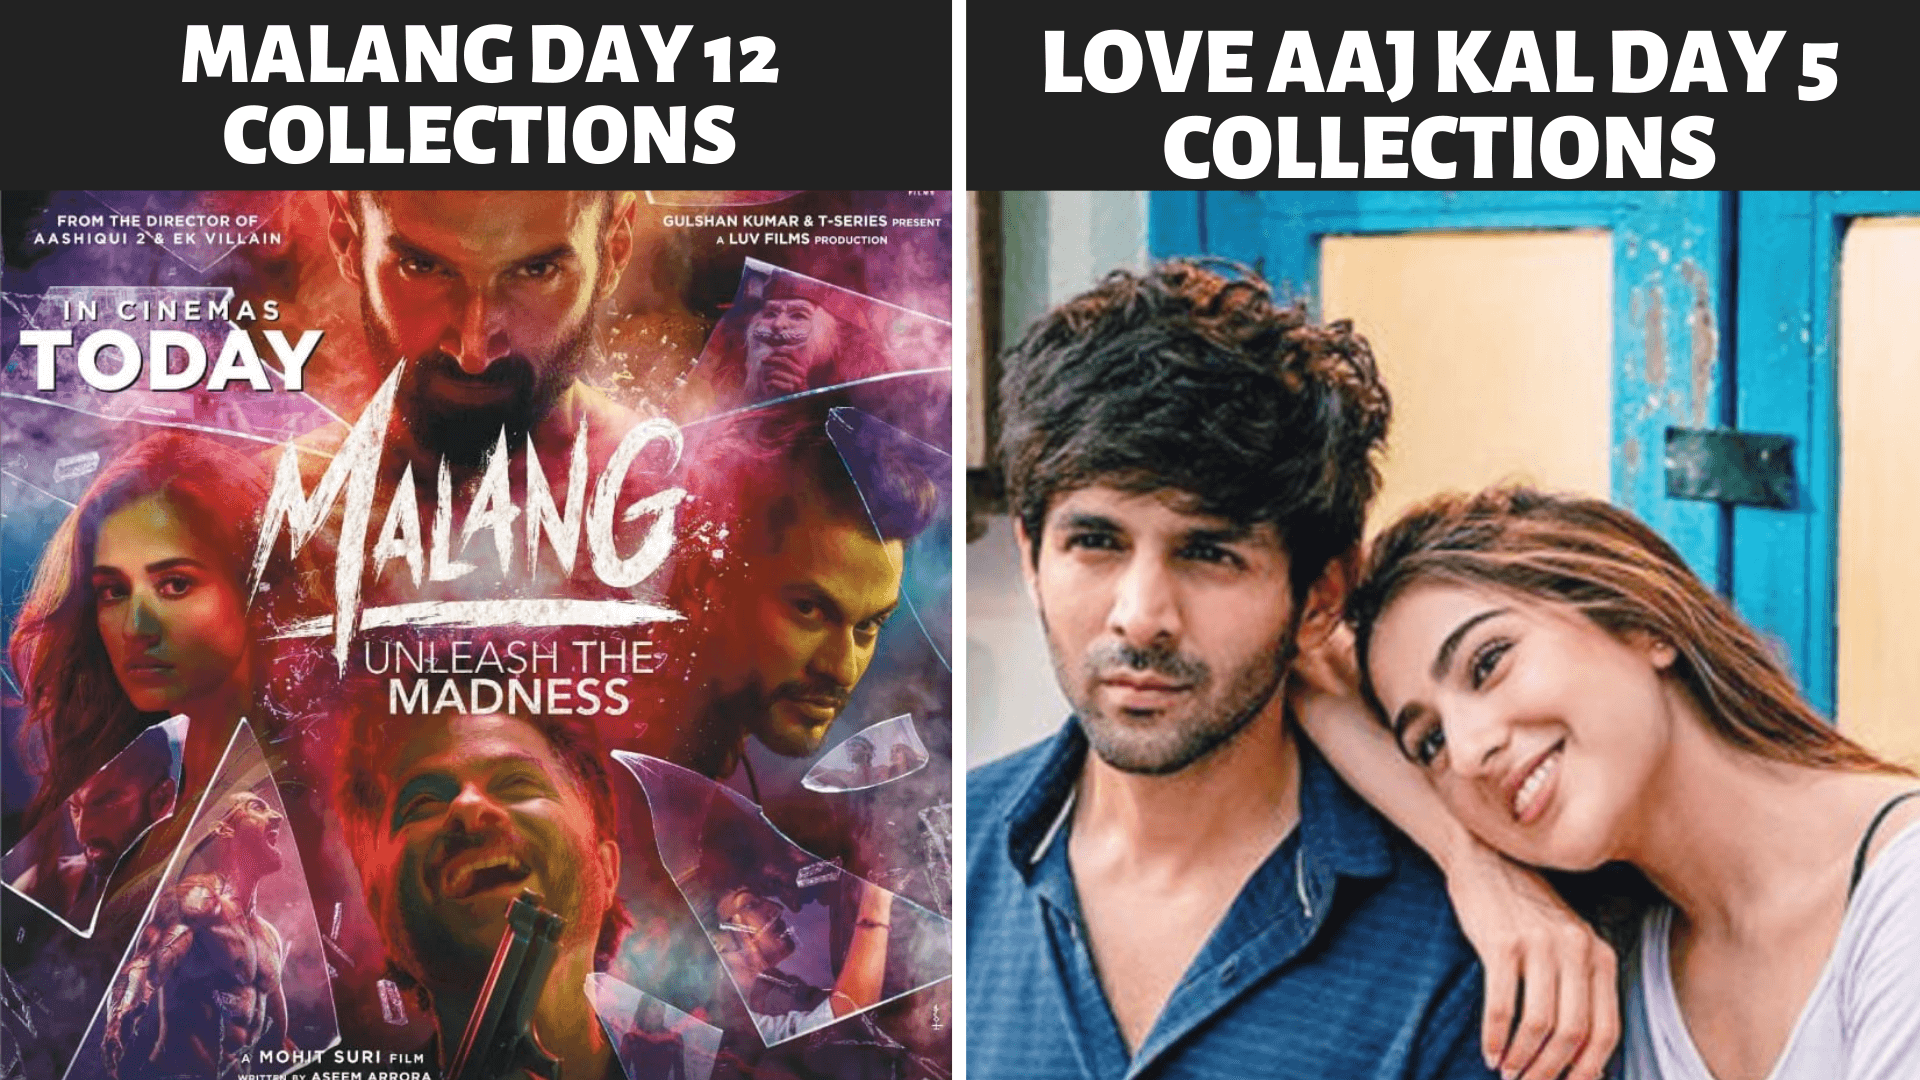 Malang Vs Love Aaj Kal Box Office Collection, Kamai, Public Review Hit or Flop Earning Business Worldwide Collection | लव आज कल और मलंग फ़िल्म की कमाई बॉक्स ऑफिस कलेक्शन  